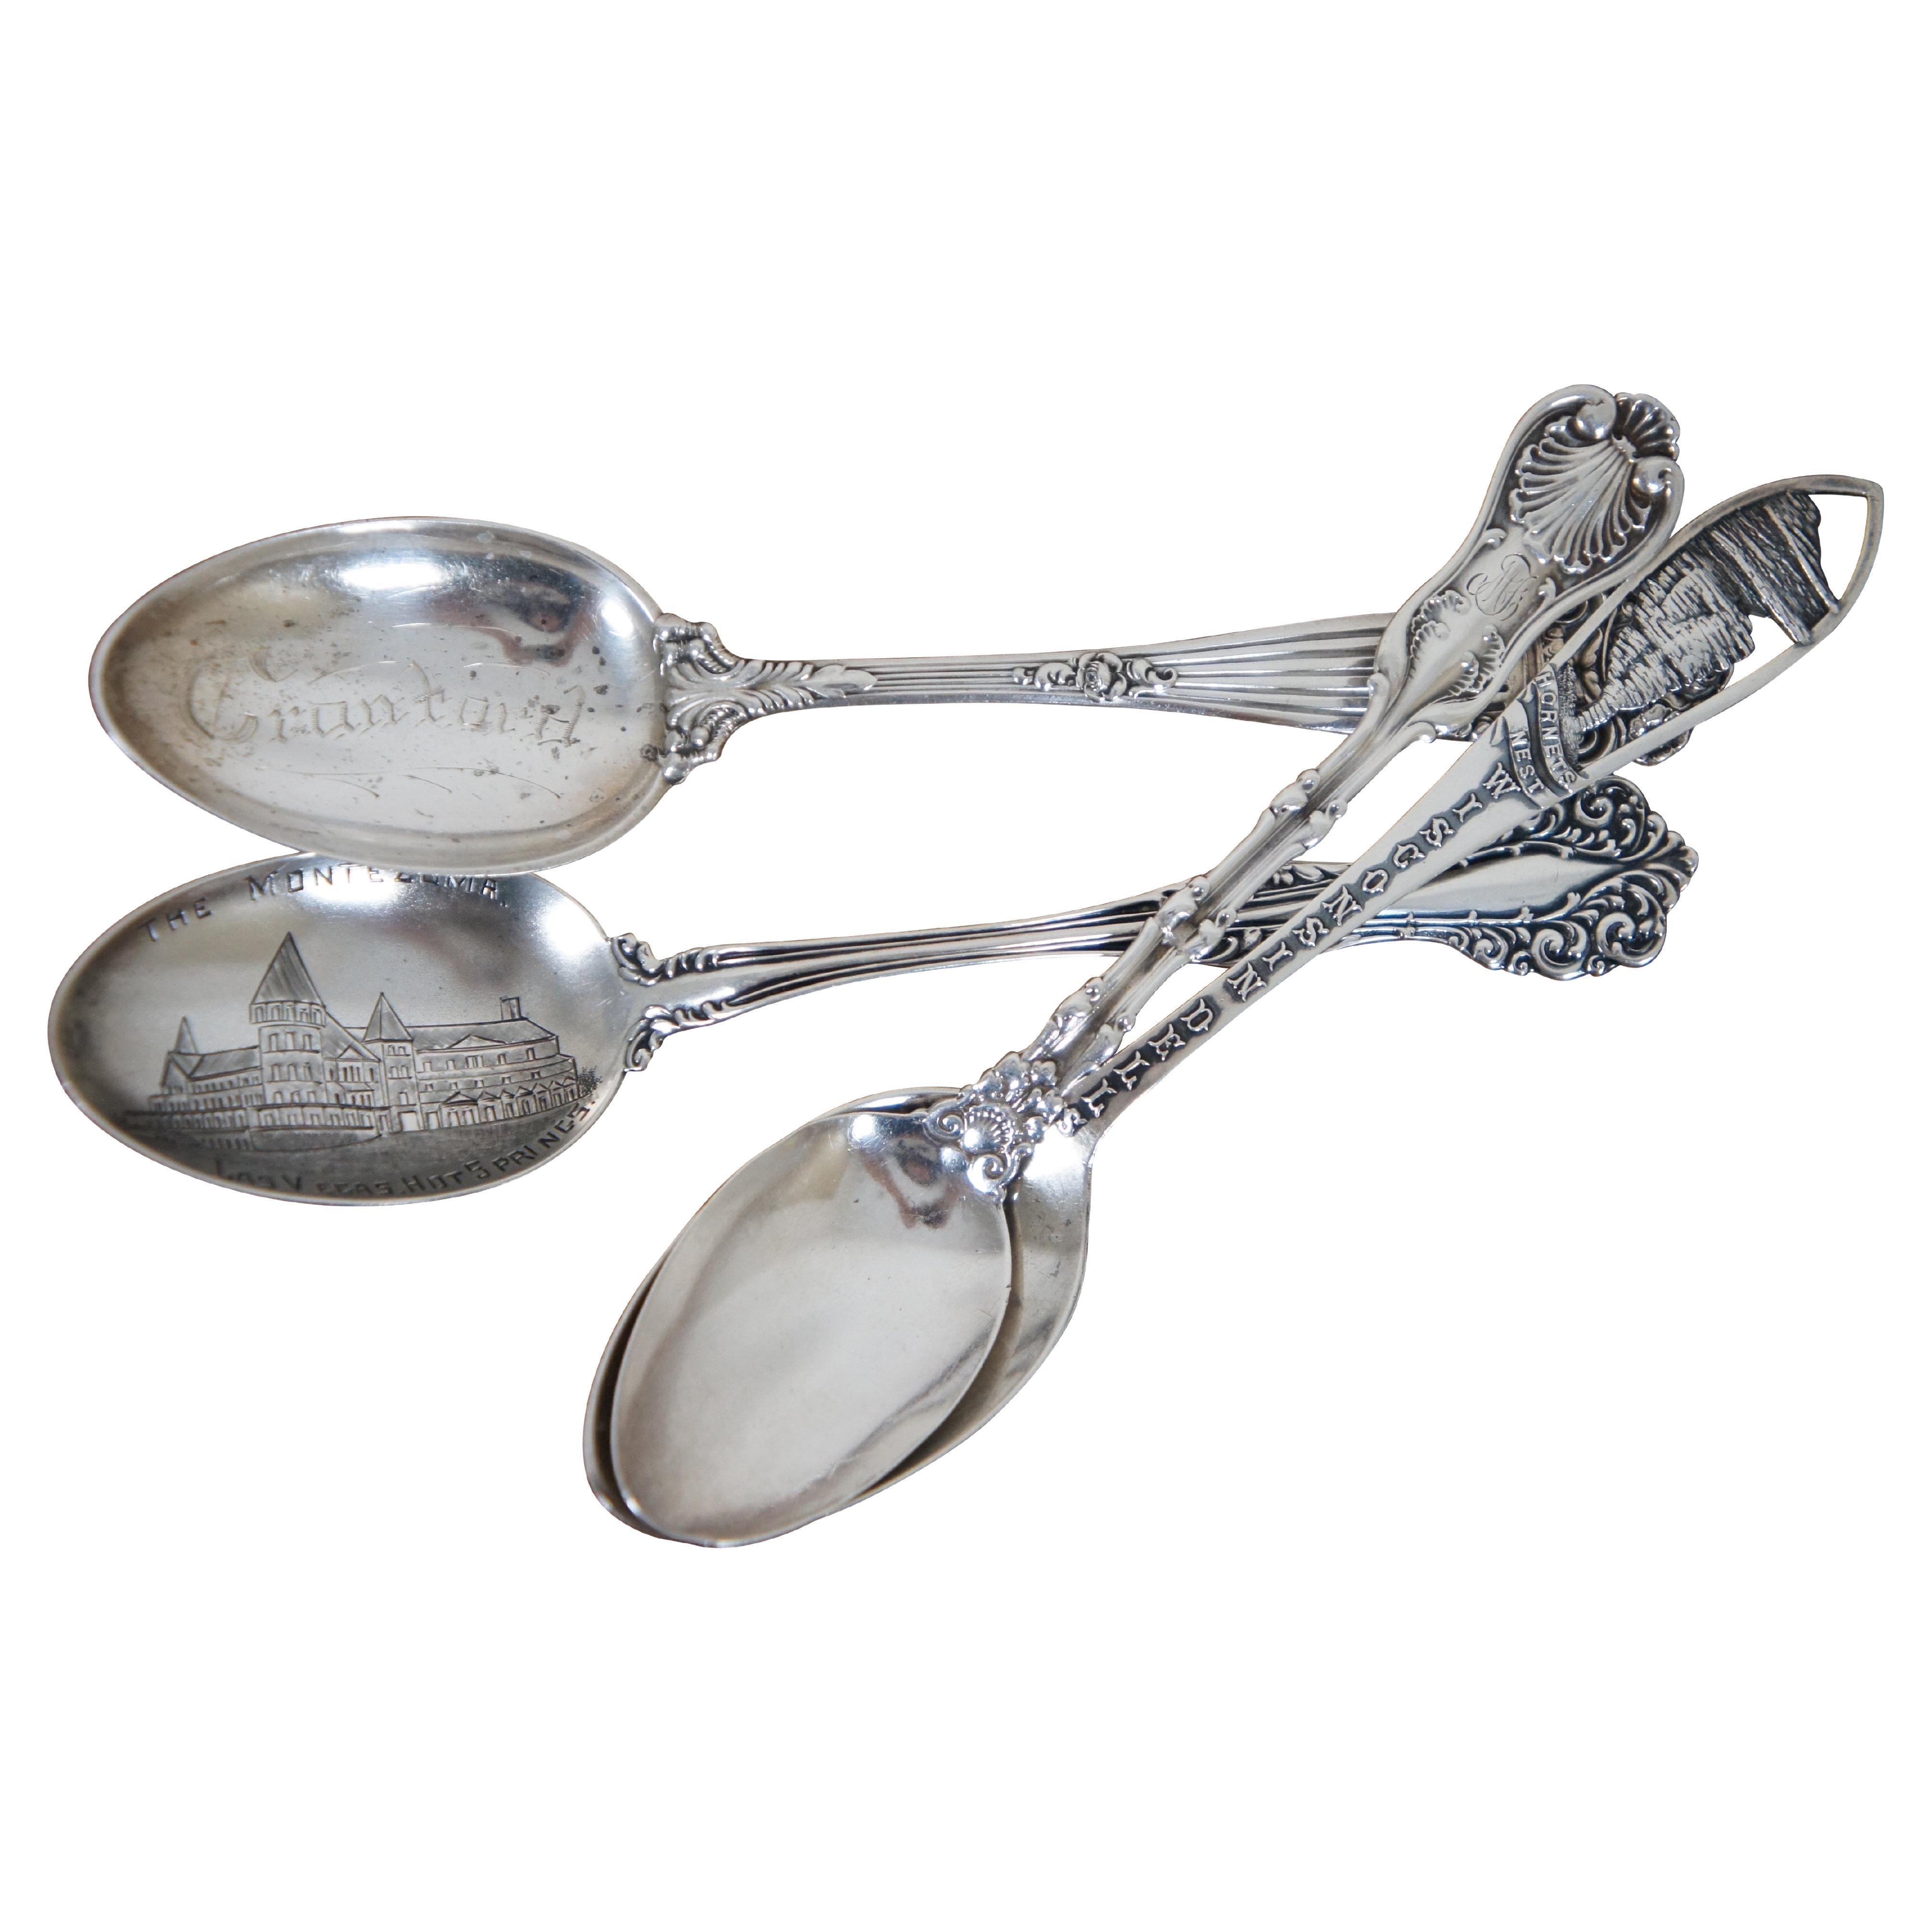 4 Antique Baroque Reticulated Sterling Silver 925 Souvenir Tea Spoons 75g 6"